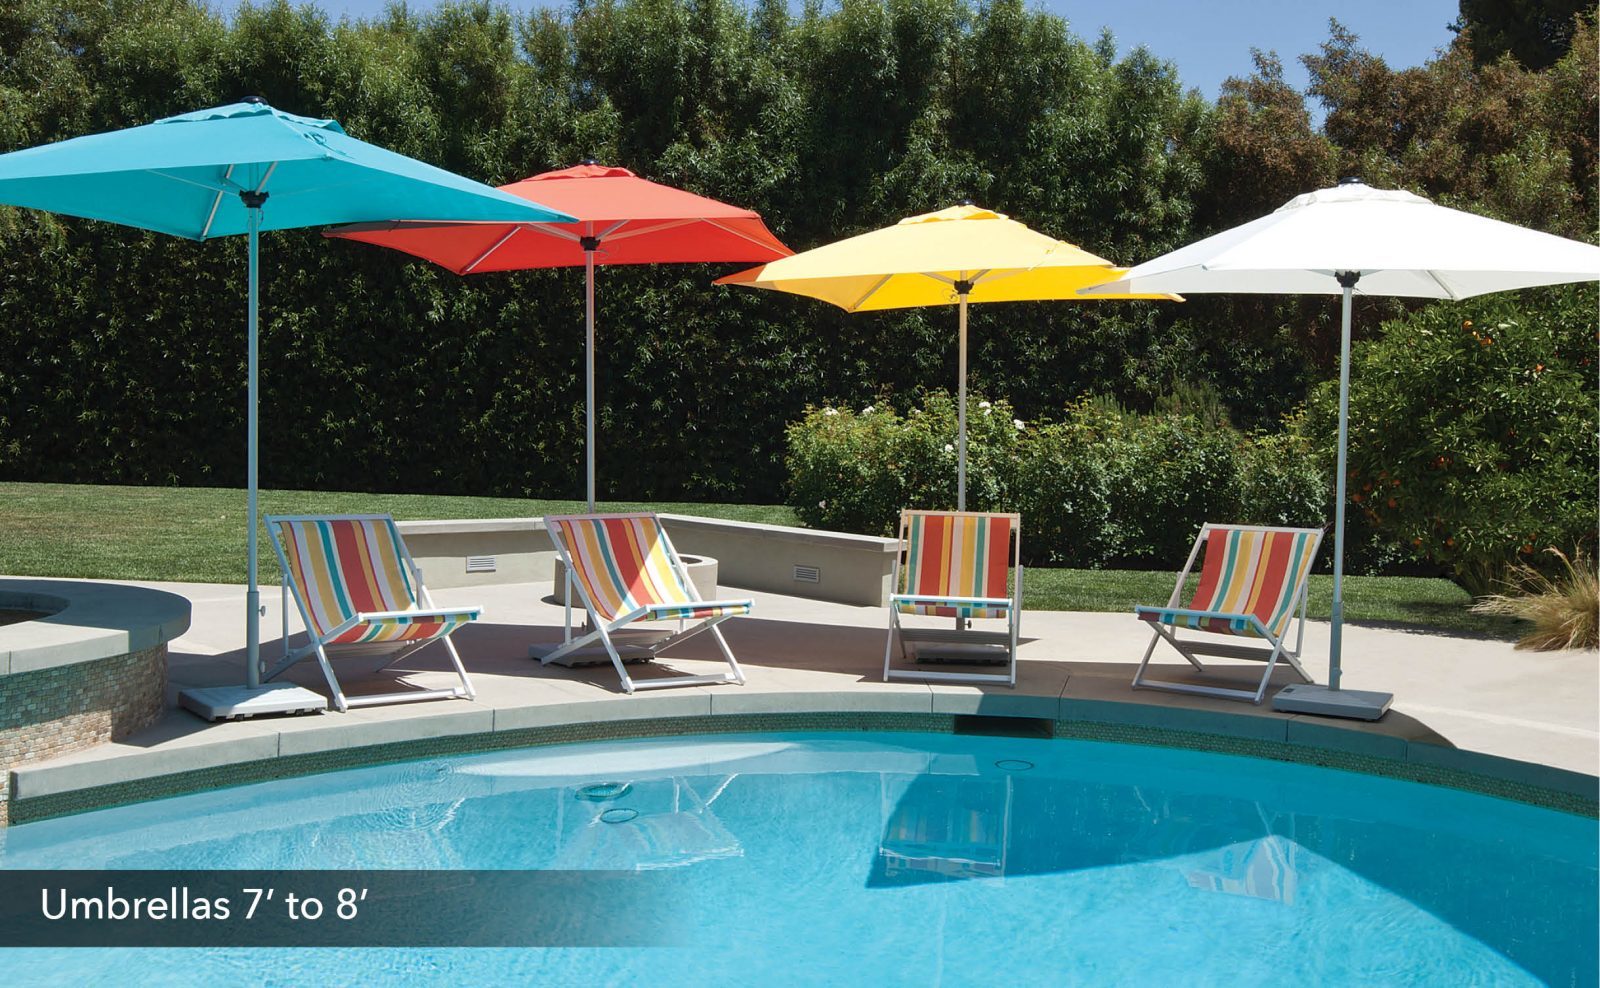 Pool umbrellas at hausers patio luxury outdoor living by hausers patio